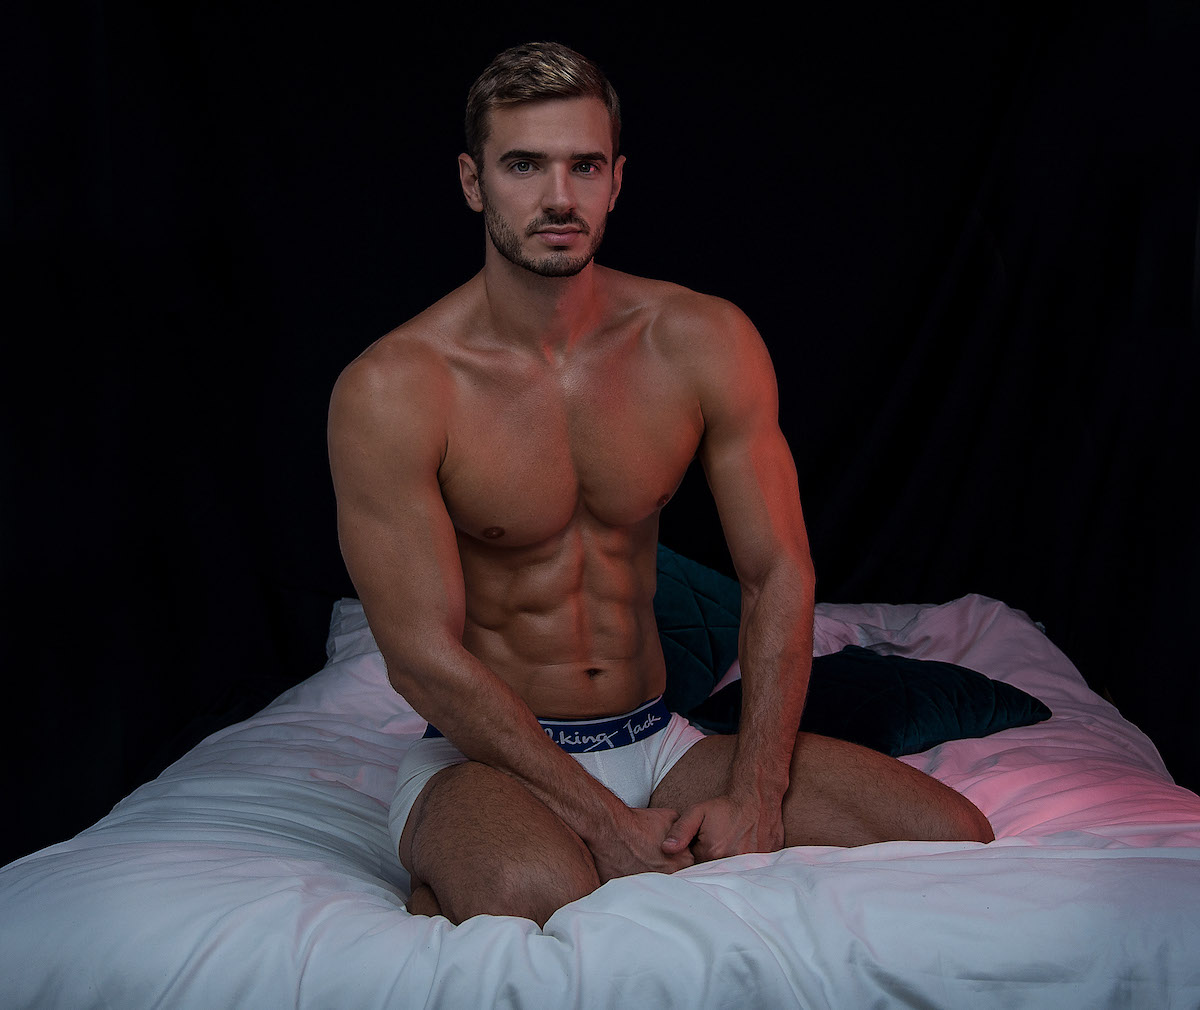 Milutin by Inch Photography - Walking Jack and Emporio Armani underwear